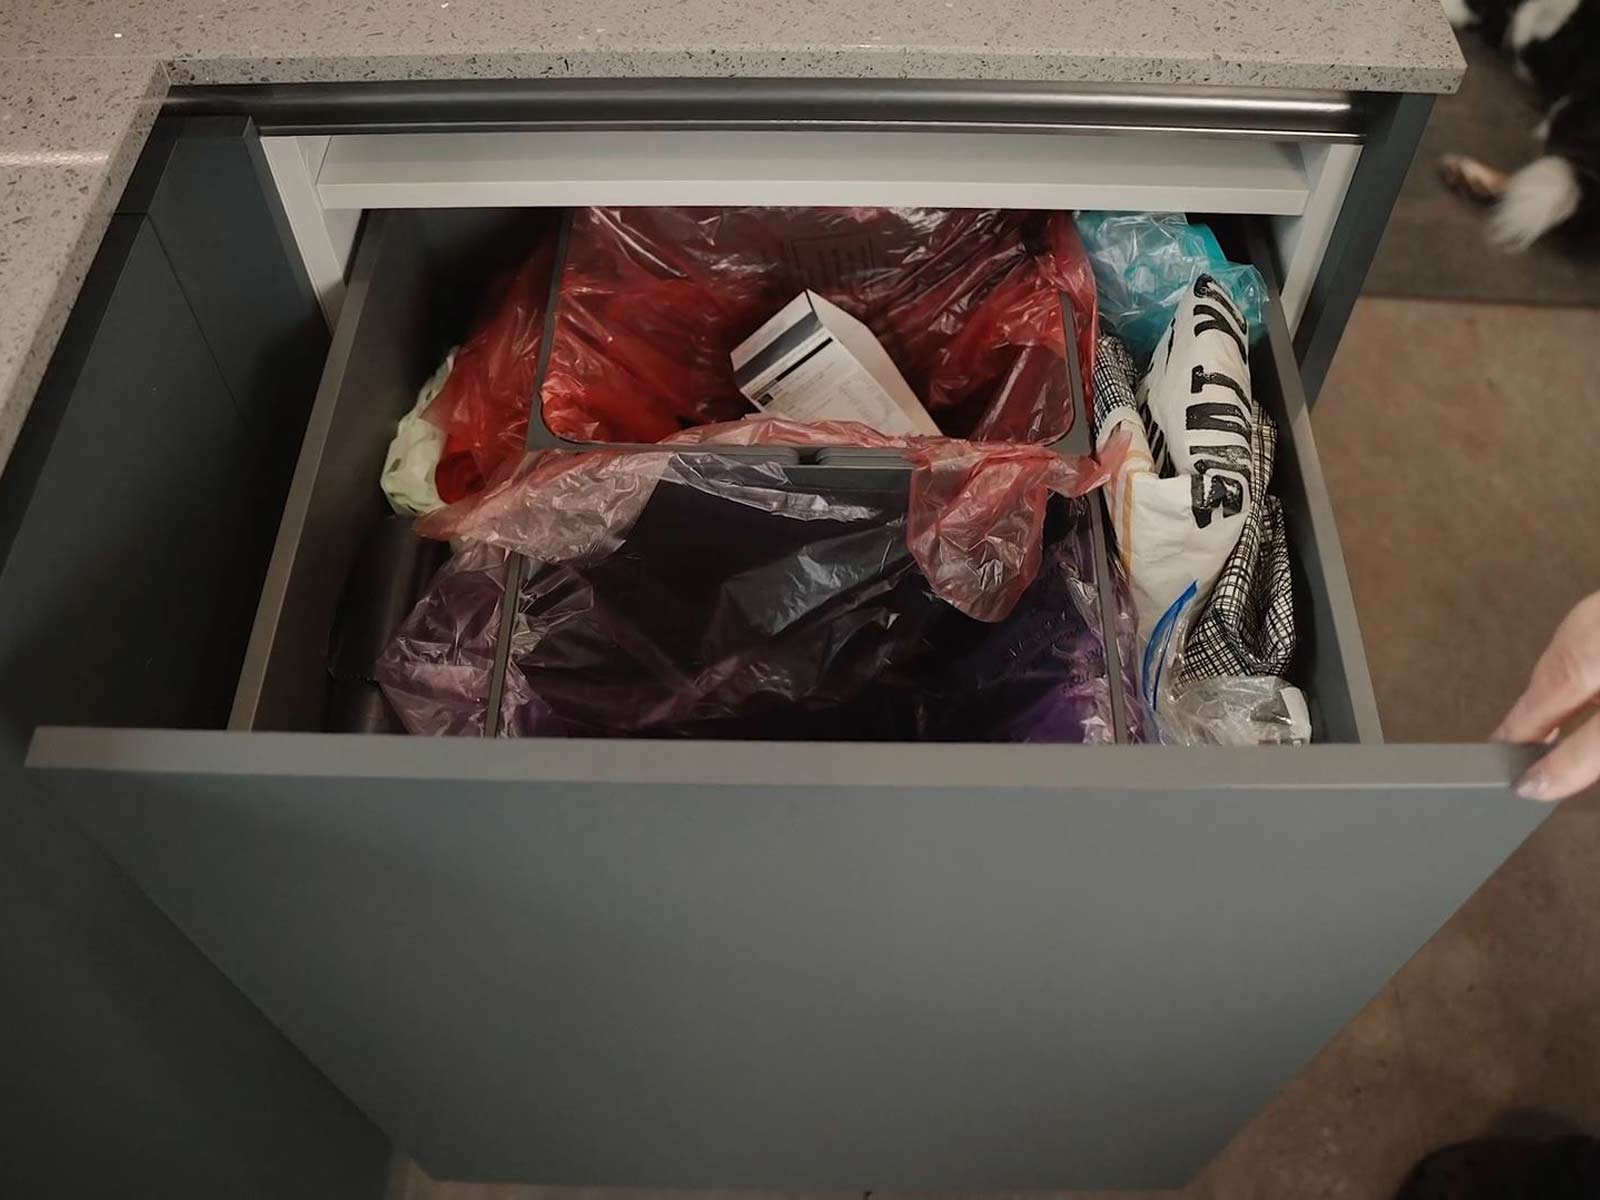 A kitchen bin for recycling hidden away in a pull-out kitchen drawer